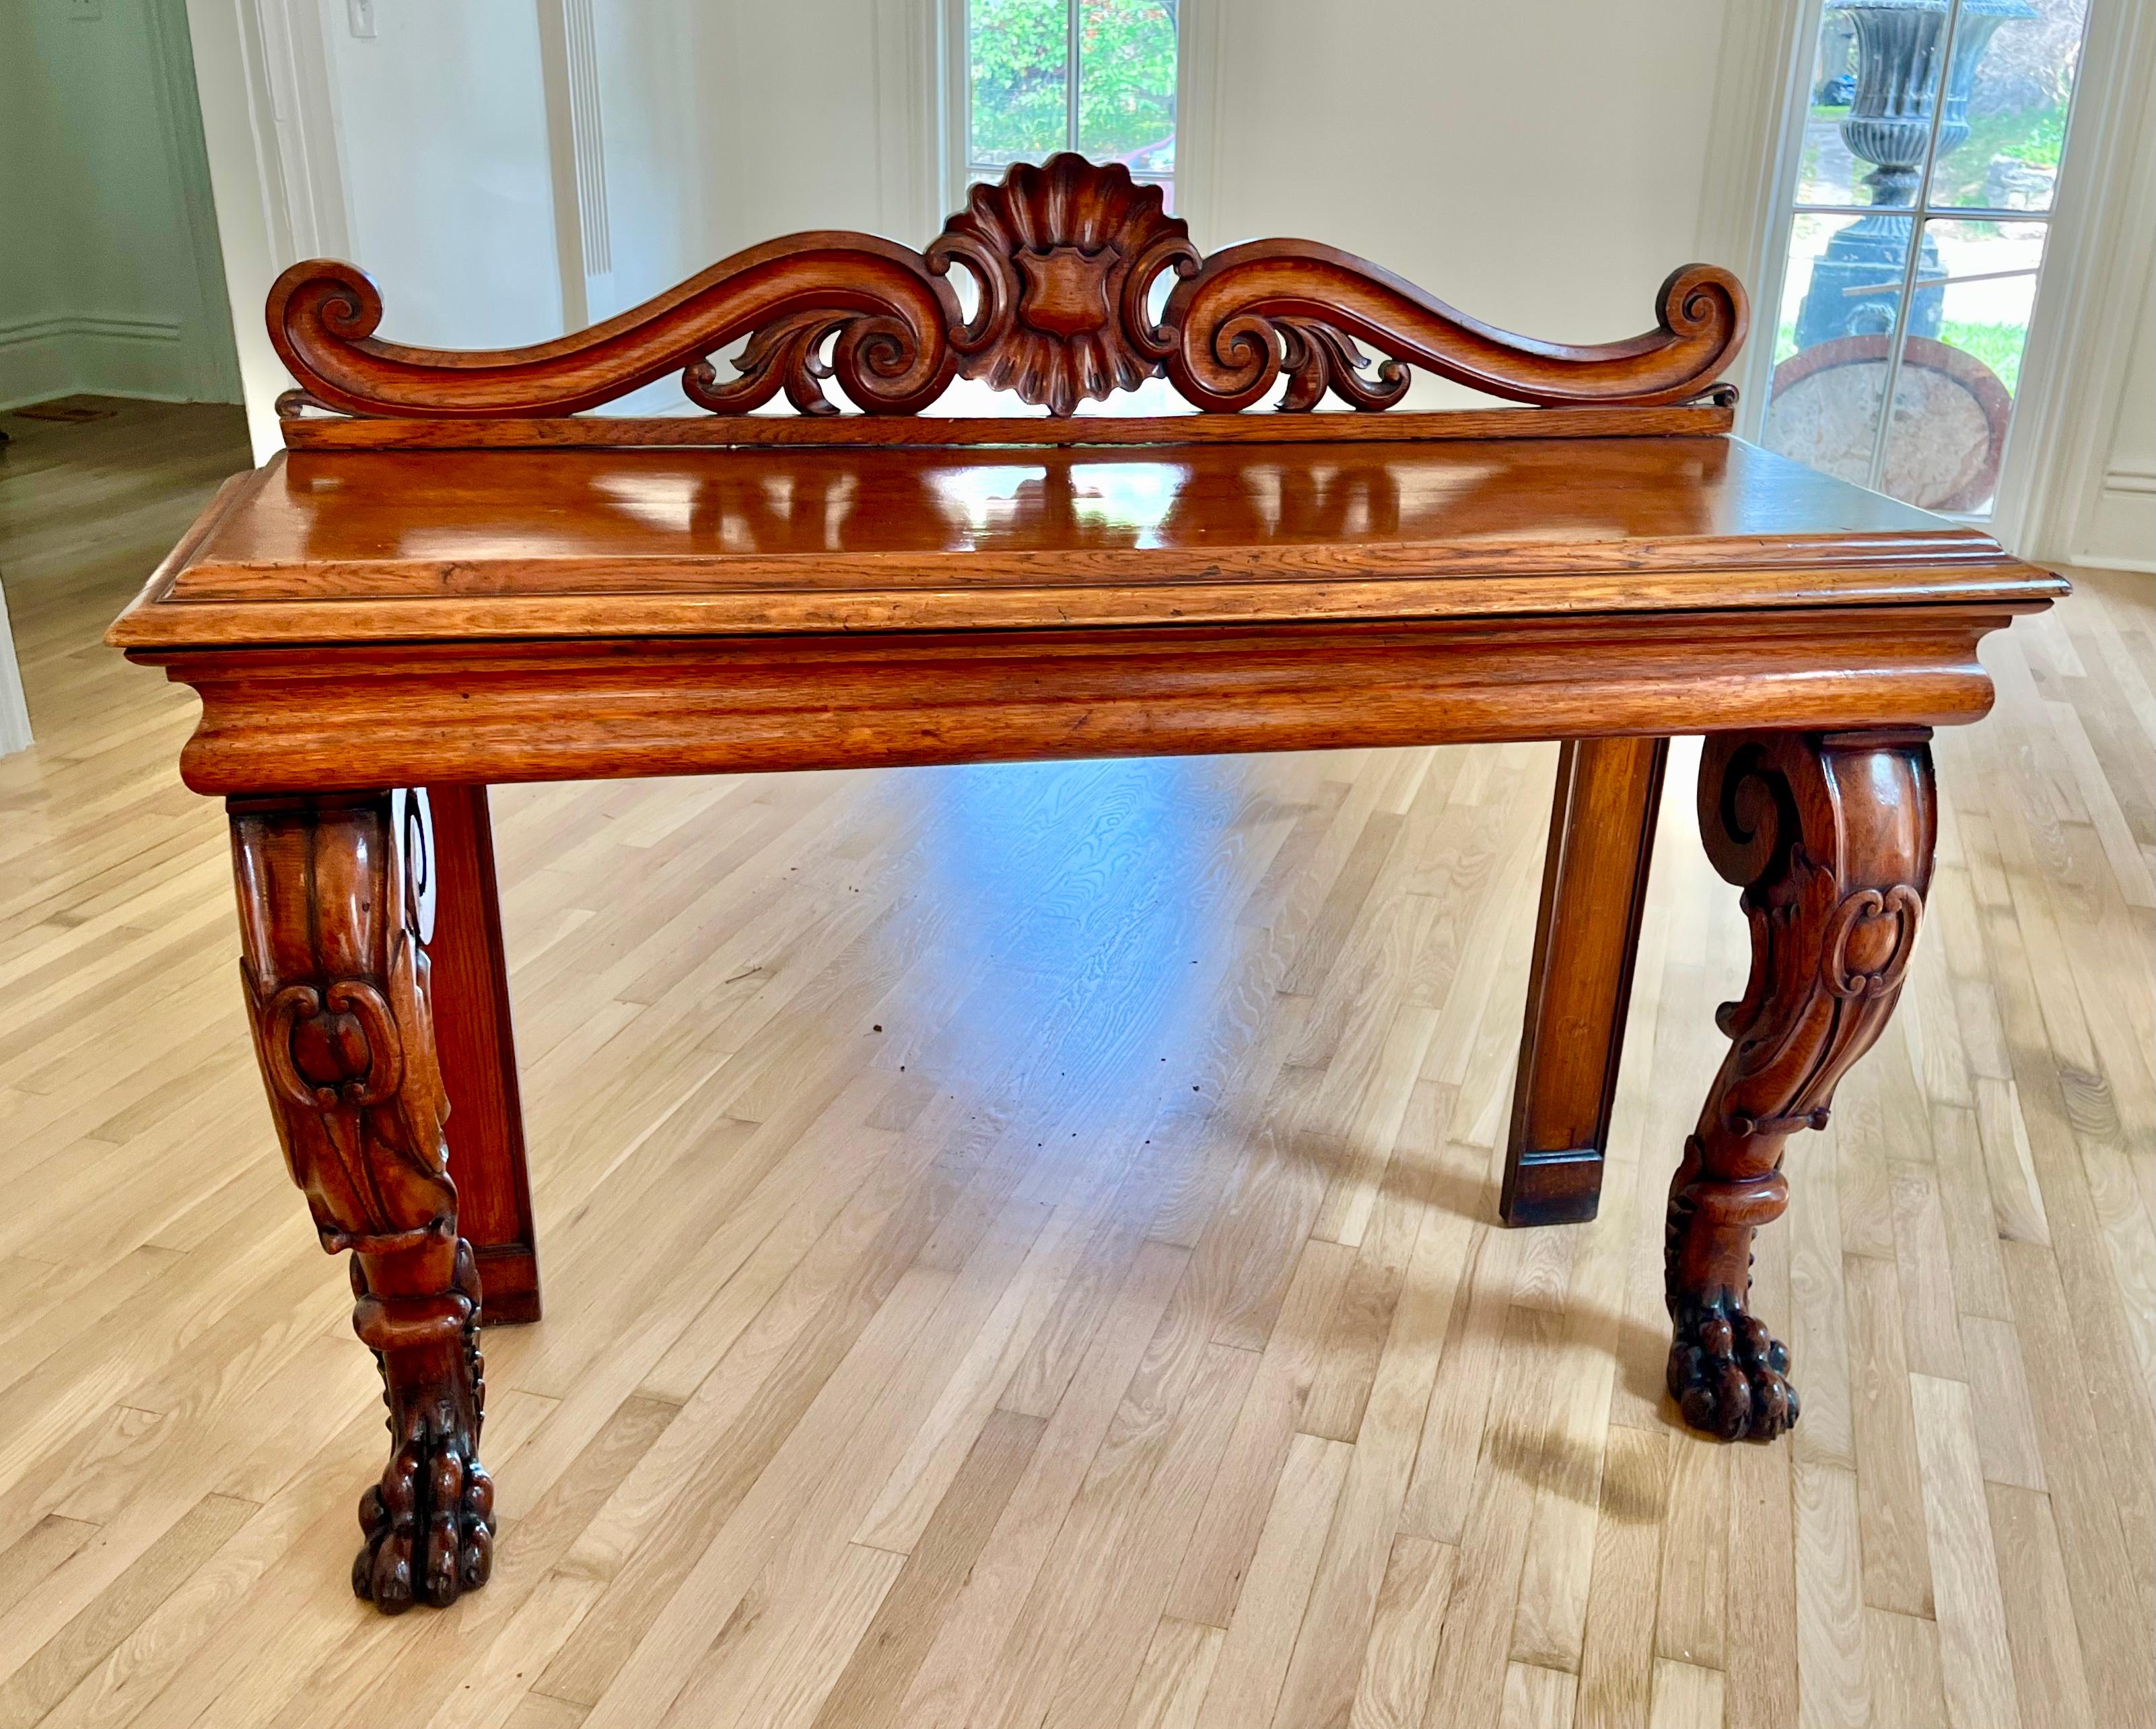 With a fine shellac polish finish. The wood a nice warm cognac color and presents very well .  In sturdy condition ,slight wear and some darkening to the richly carved paw feet (fully intact). Some old filled age cracks (note filled crack on one leg